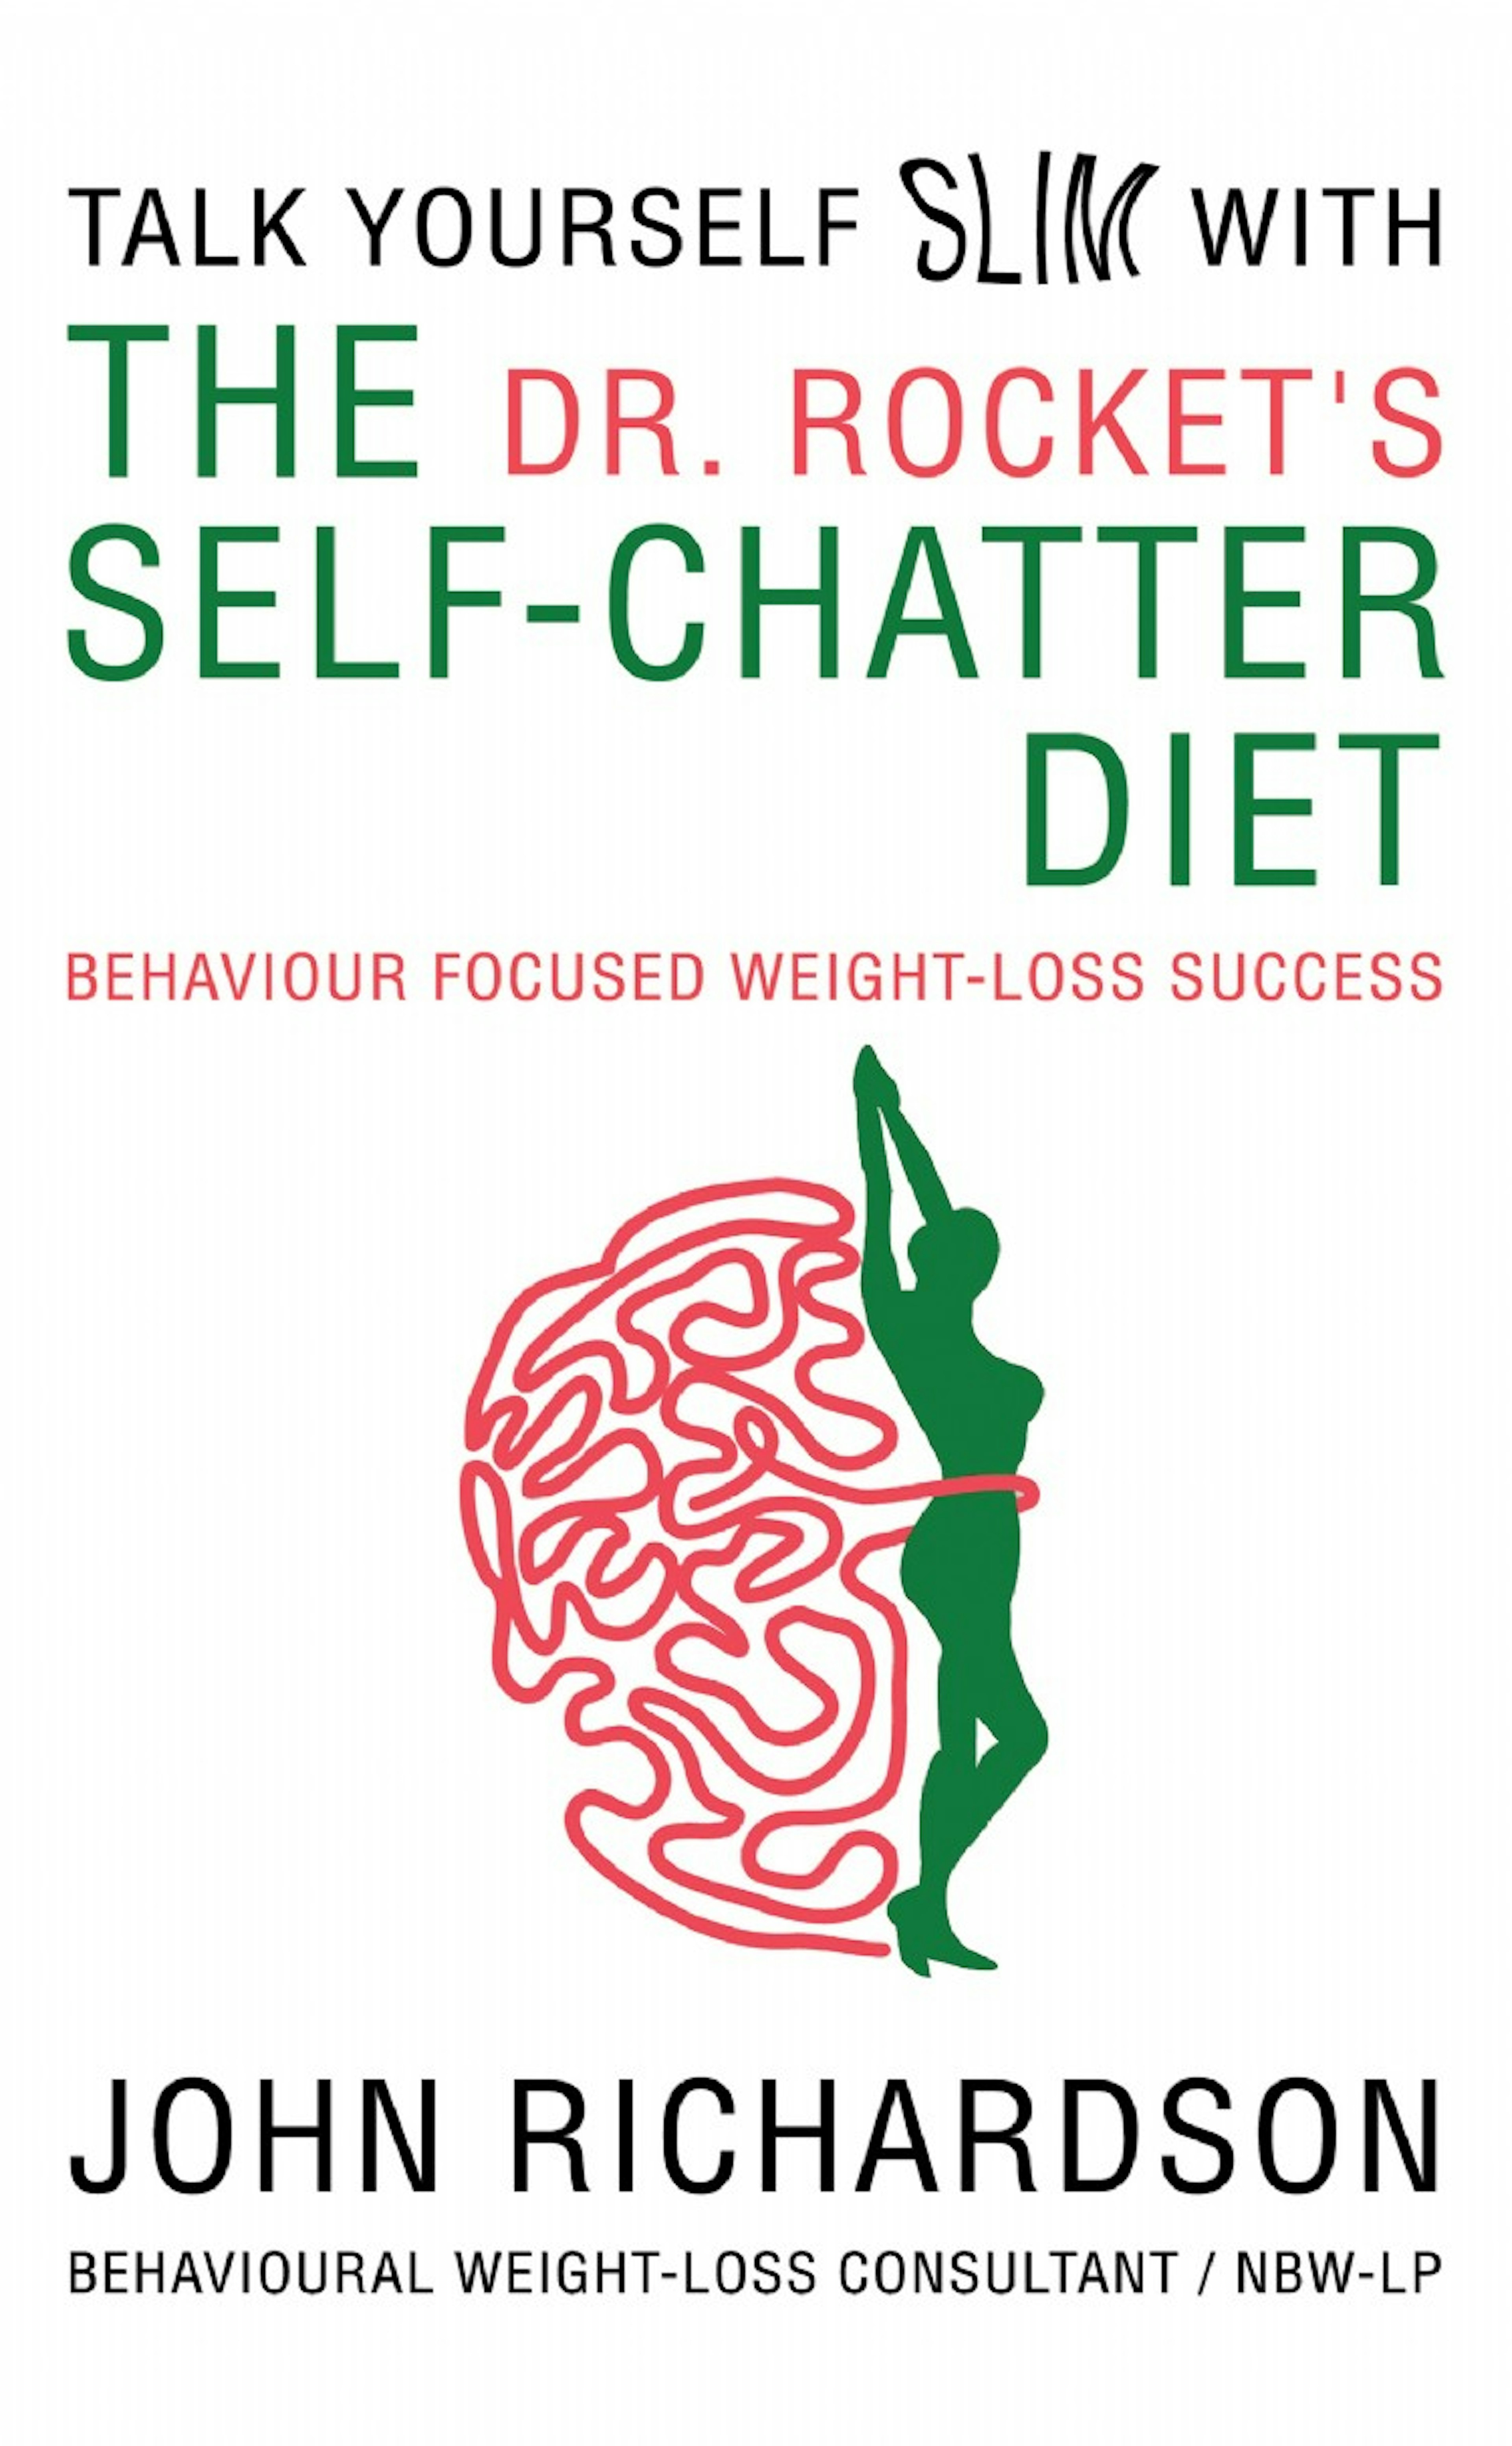 Dr Rocket's Talk Yourself Slim with the Self-Chatter Diet